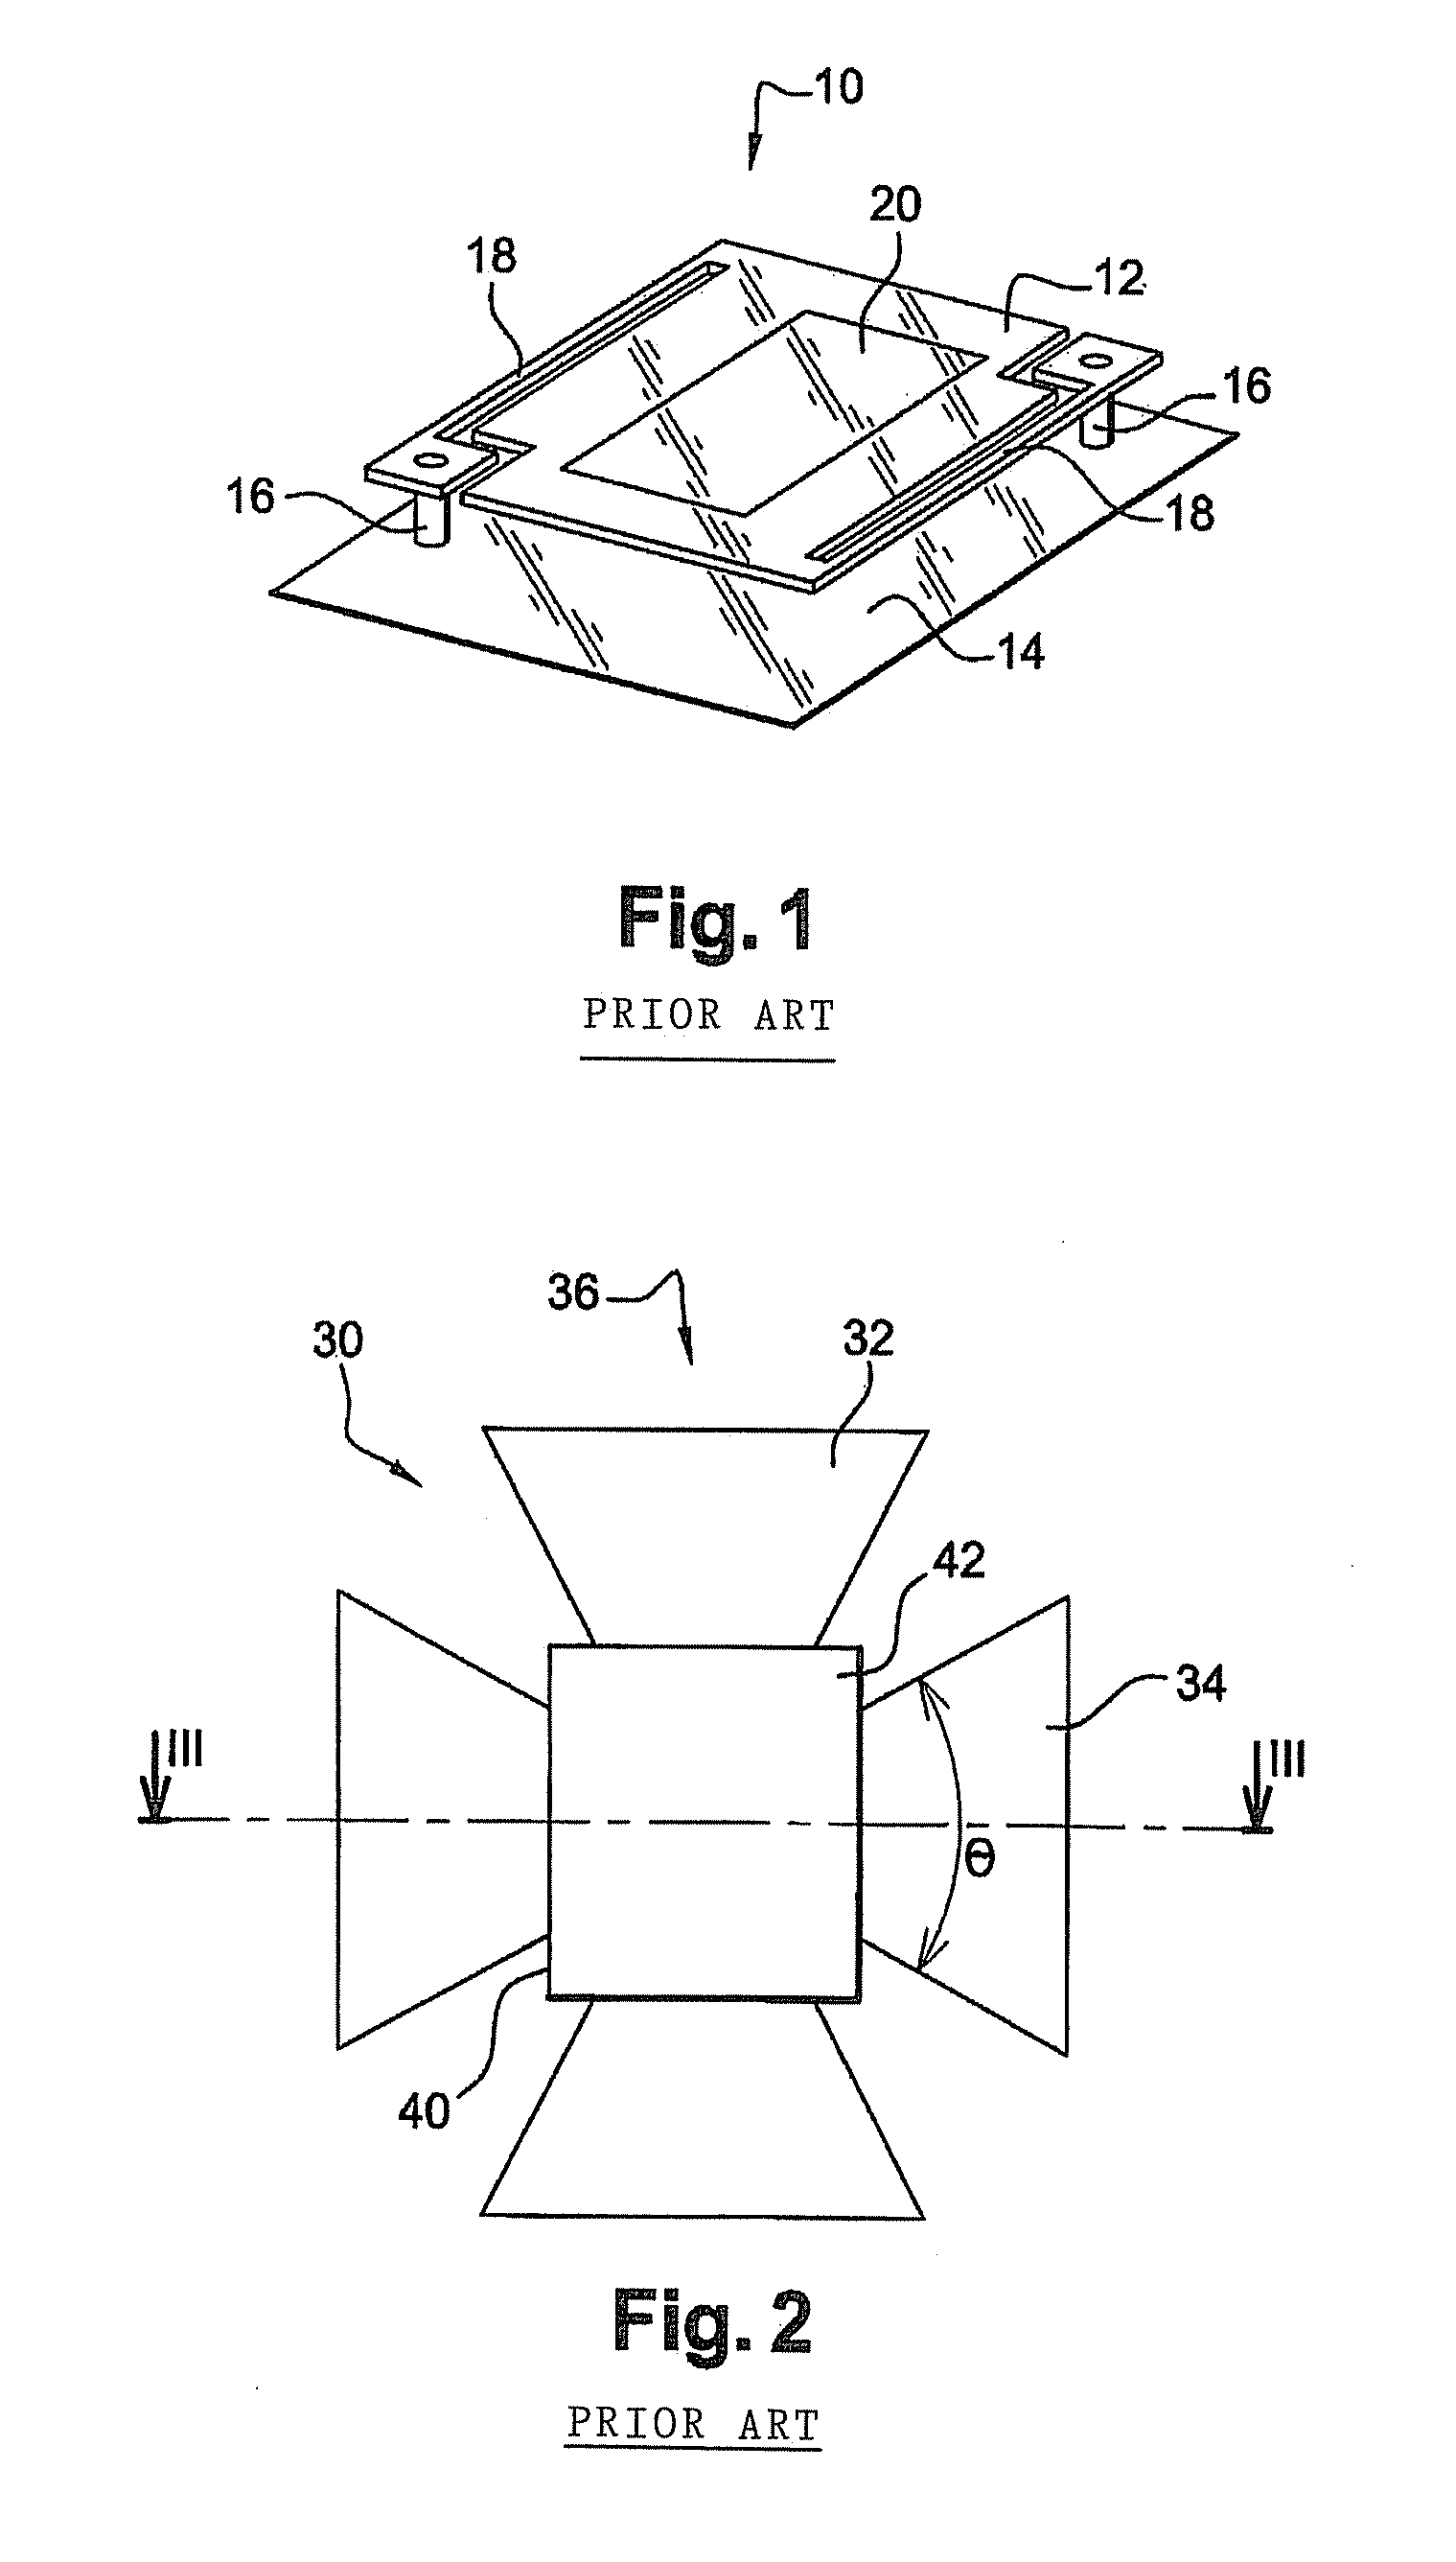 Bolometric detector for detecting electromagnetic radiation in the region extending from infrared to terahertz frequencies and an array detection device comprising such detectors